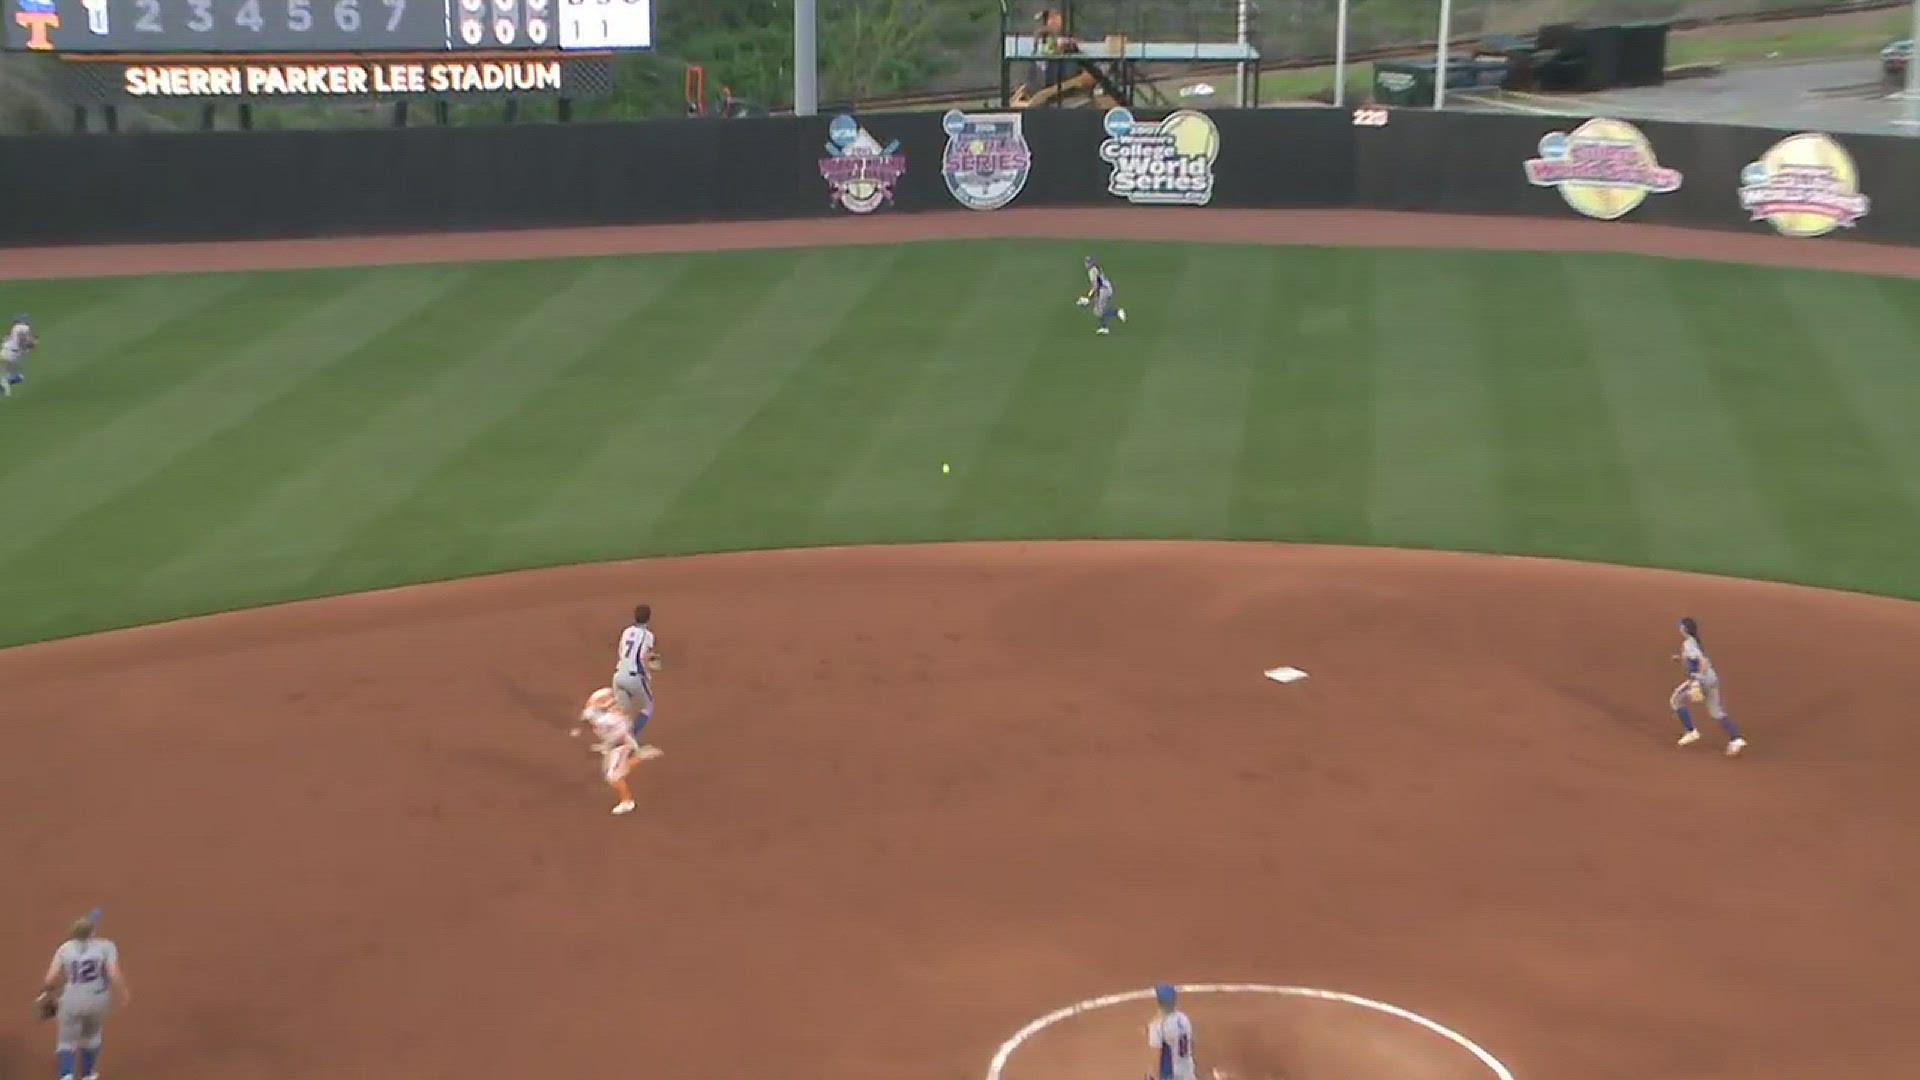 The Vols scored 11 runs to mercy-rule Tennessee State in Game 2 of Tuesday's double header.